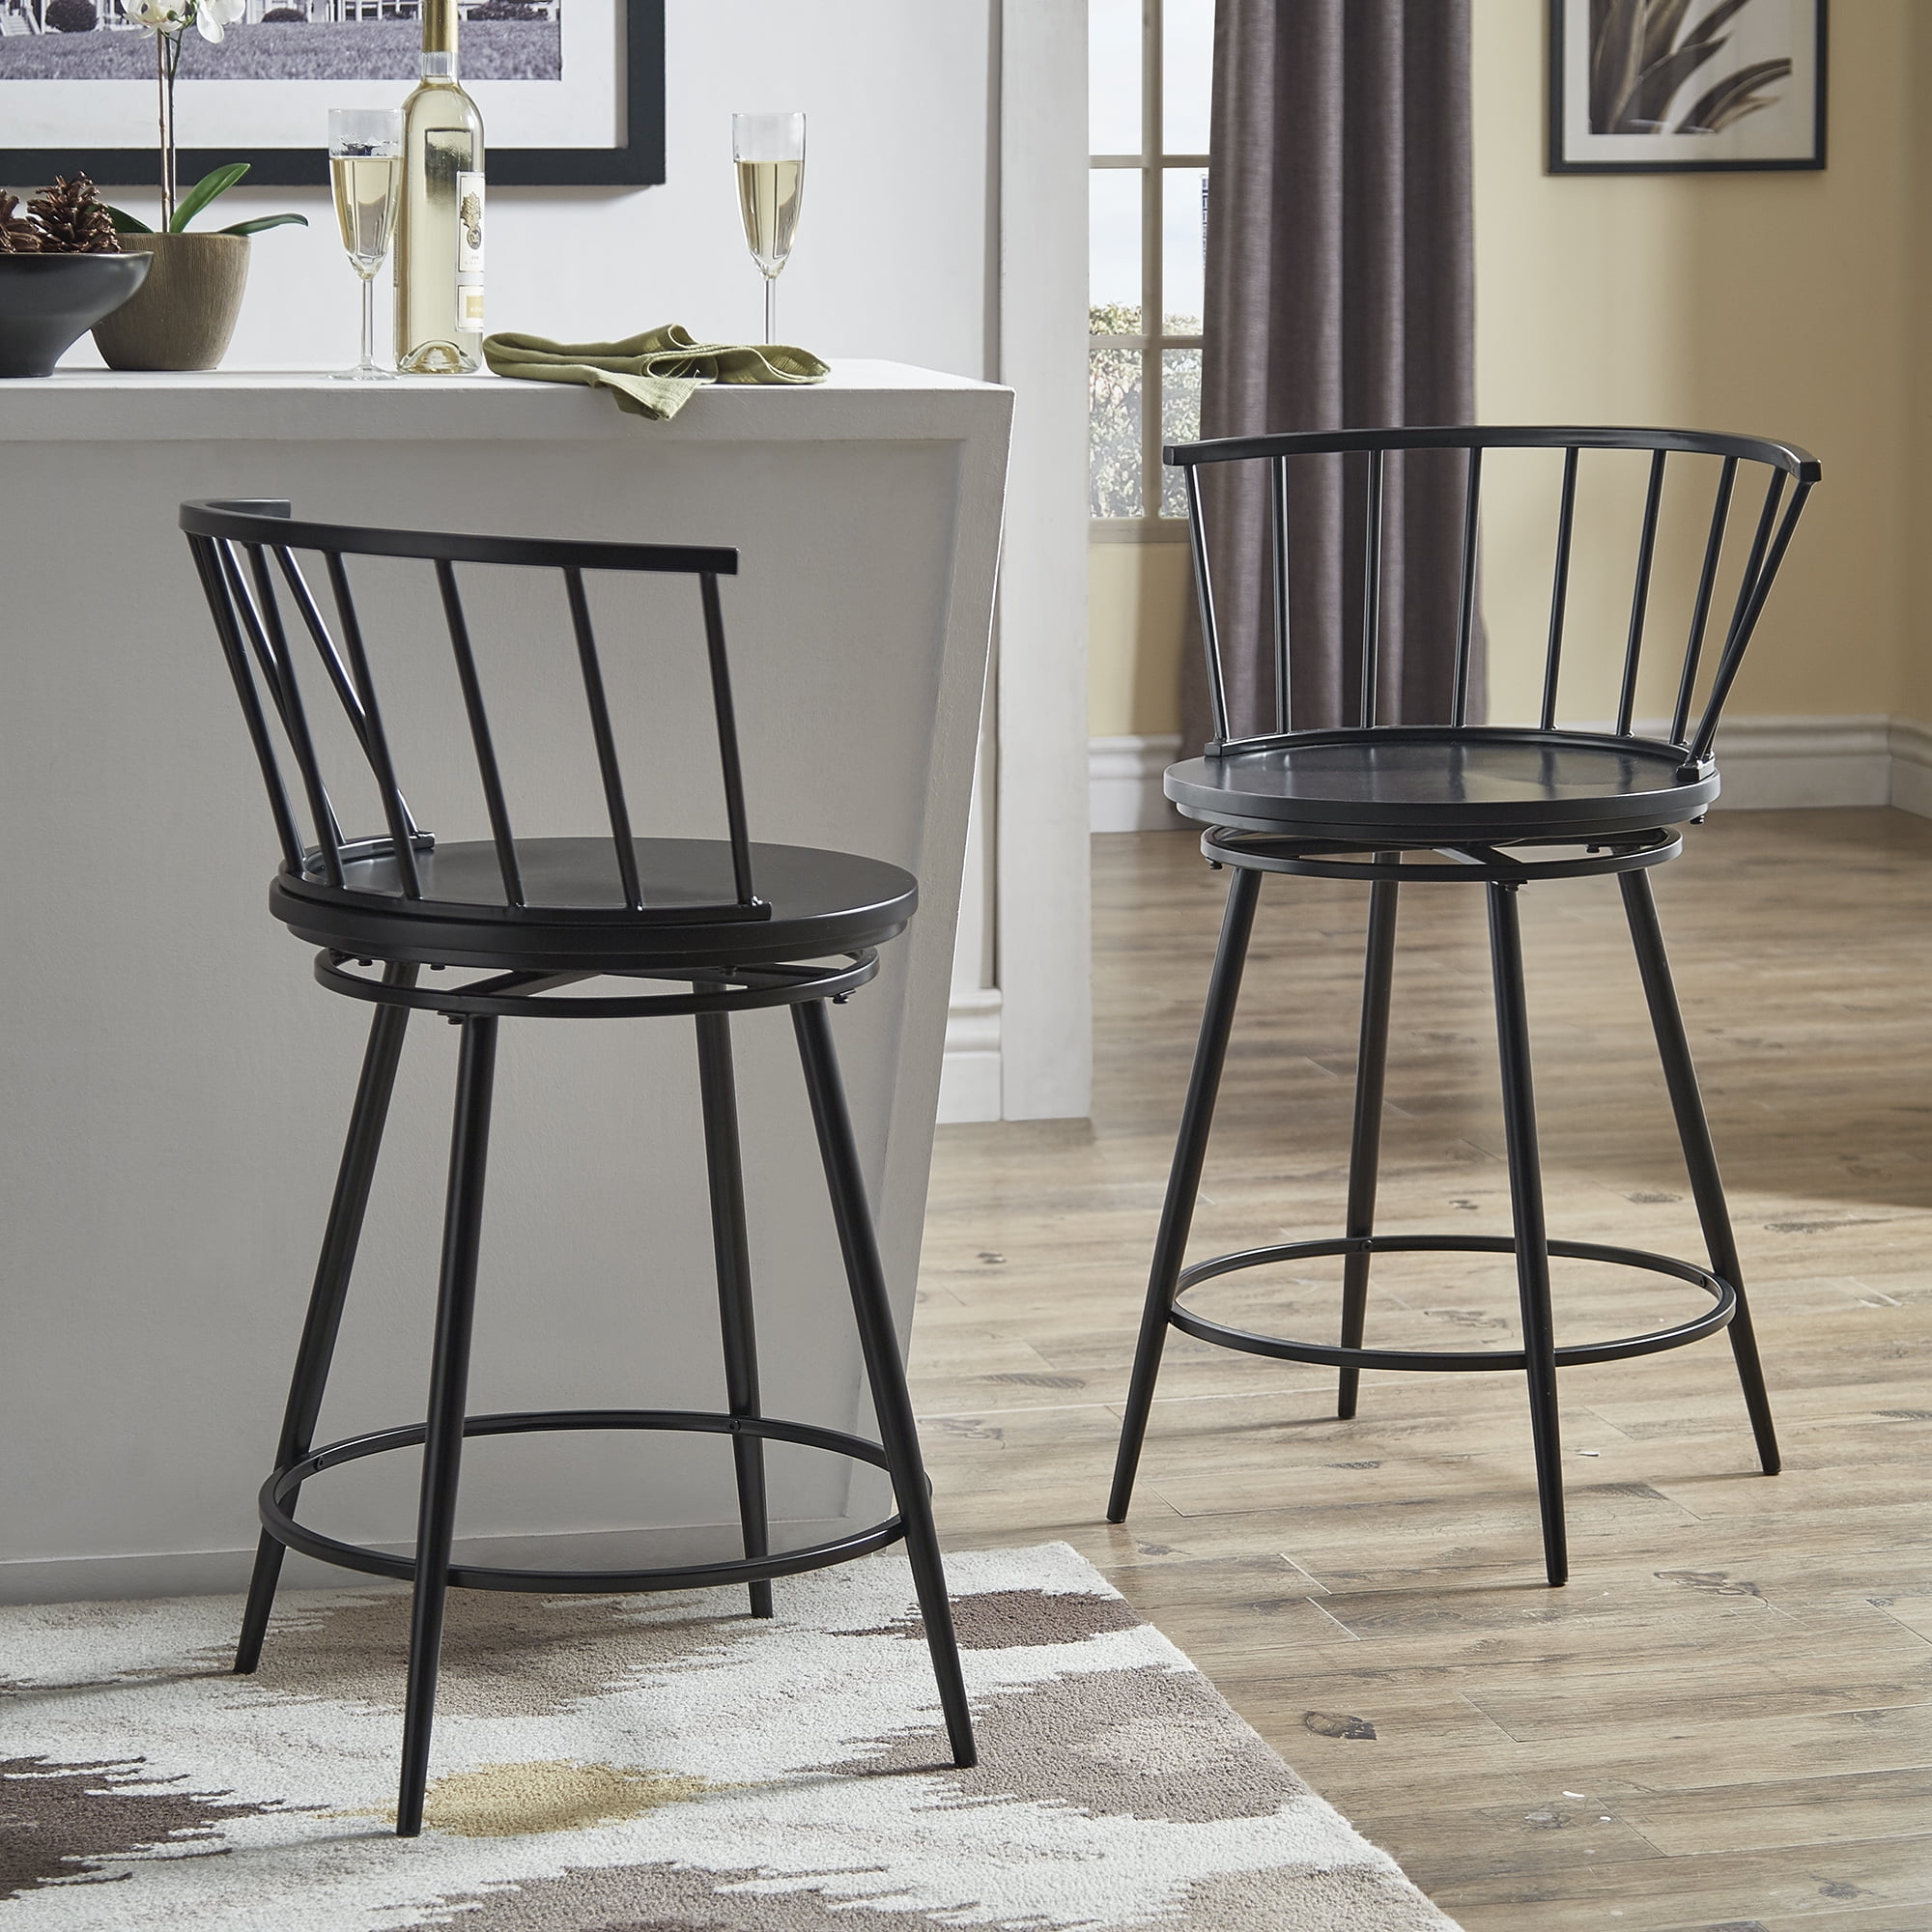 Set of 2 24'' Counter Bar Chairs Kitchen Patio Metal with Back Swivel Stools 